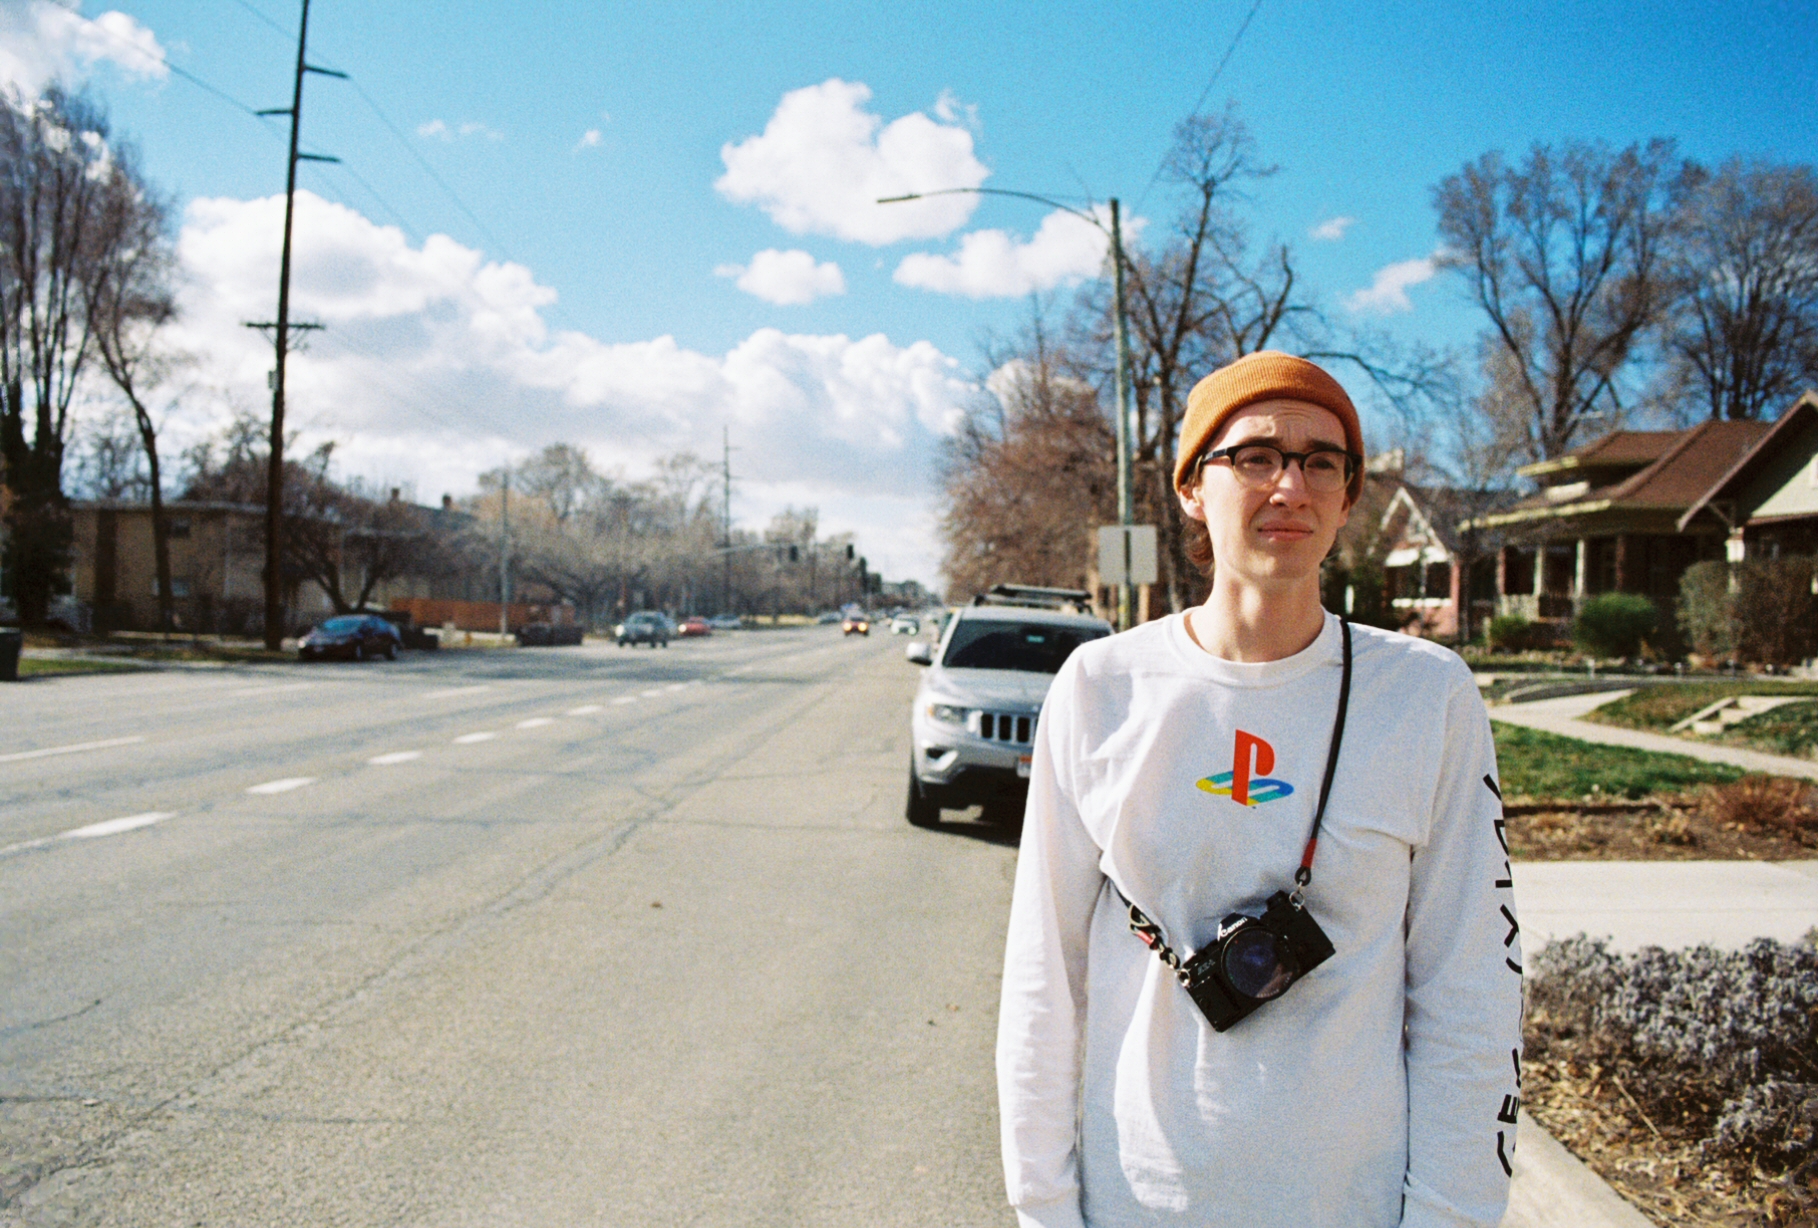 Glen with a beenie hat and a Playstation shirt